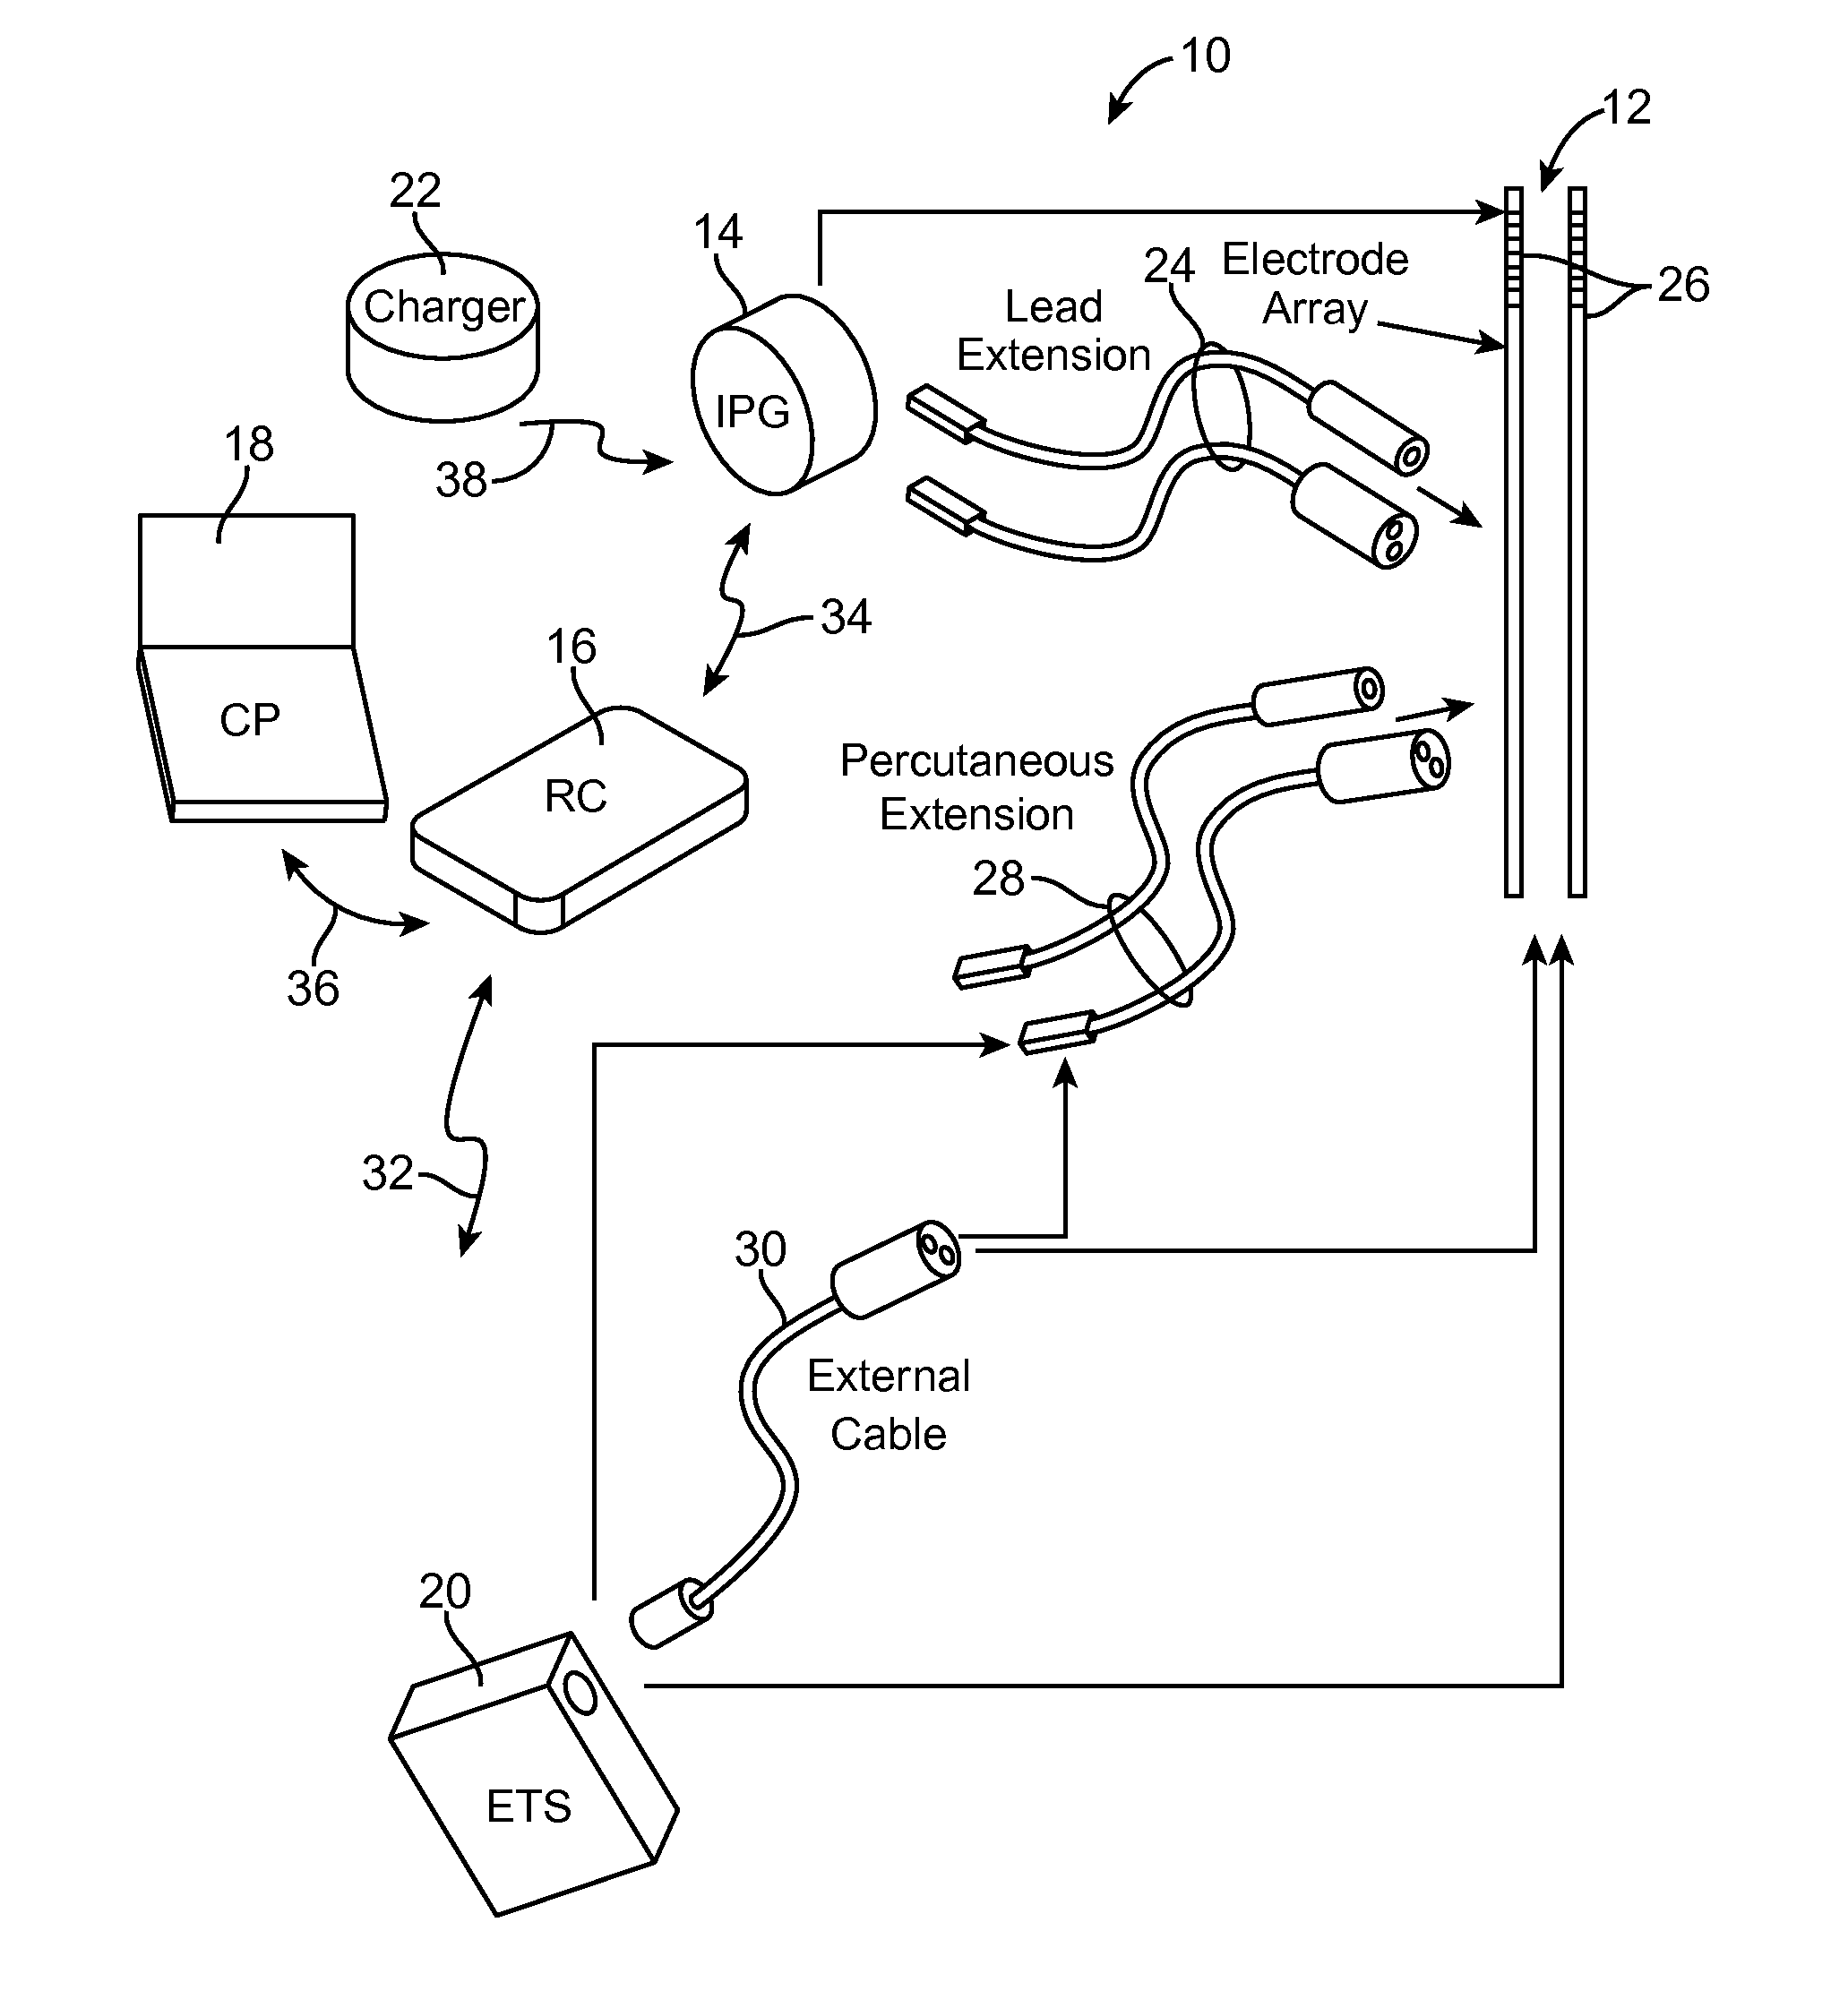 System and method for estimating volume of activation in tissue